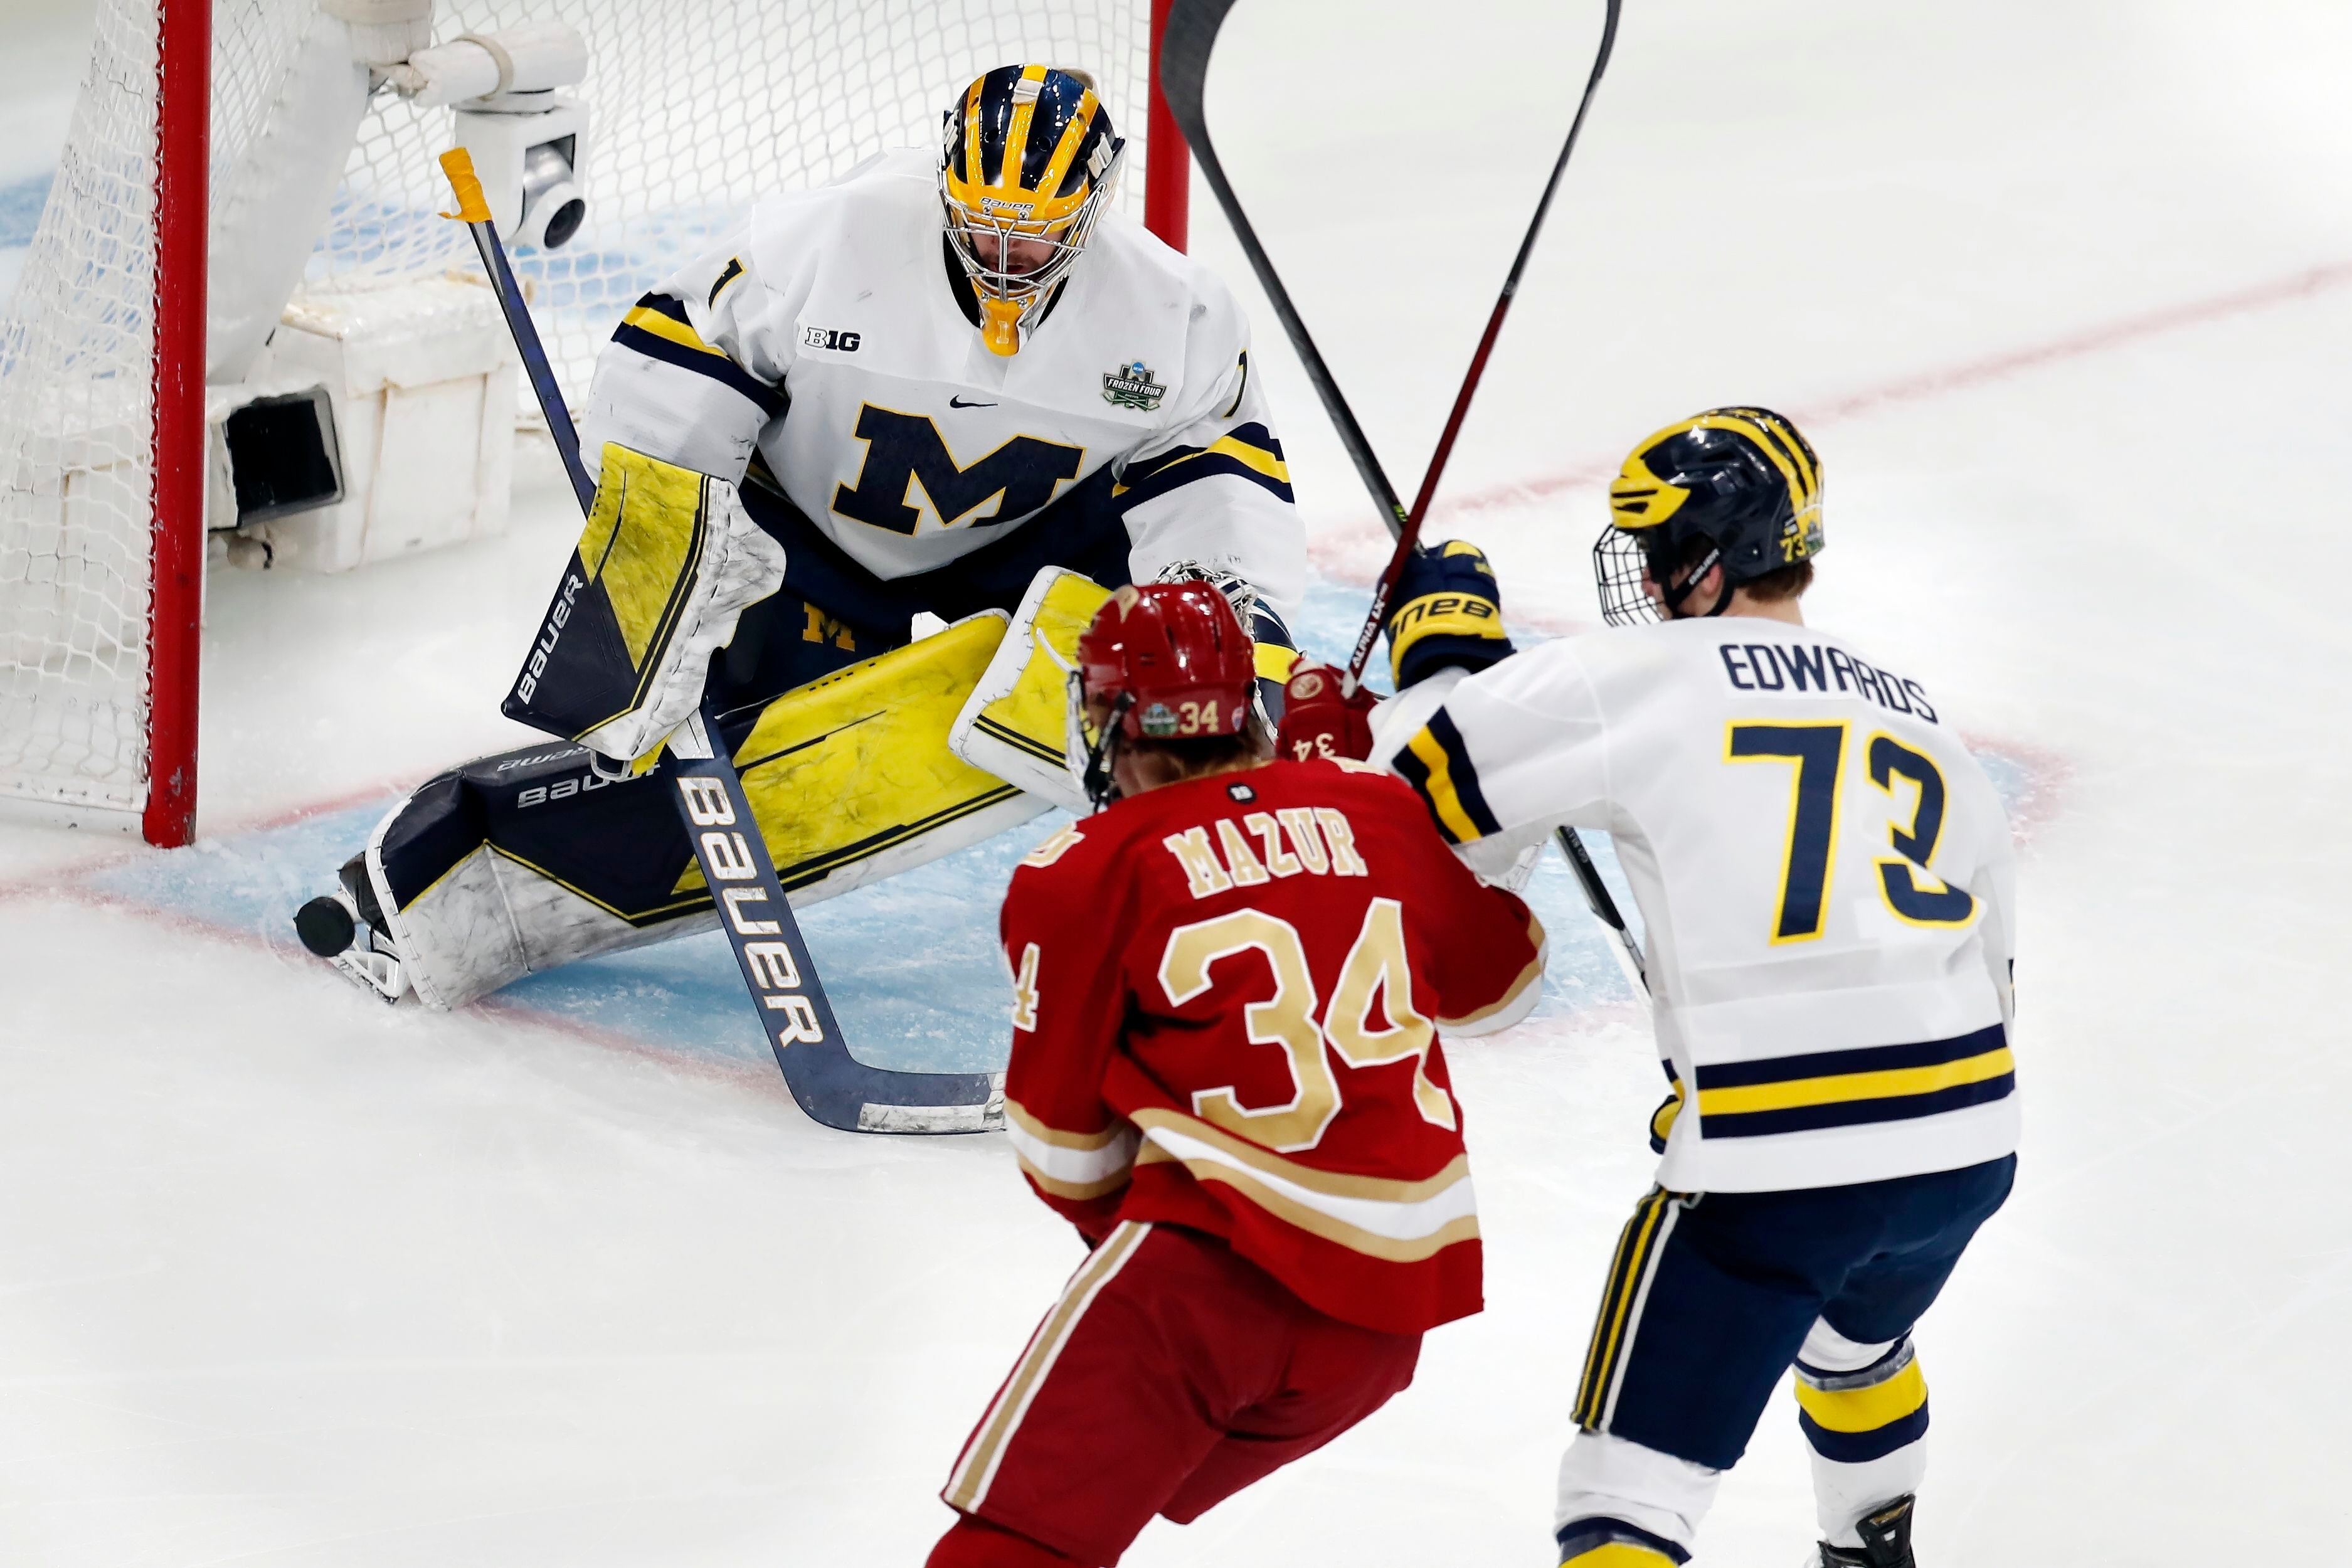 Frozen Four might be more than just a dream for Michigan hockey team